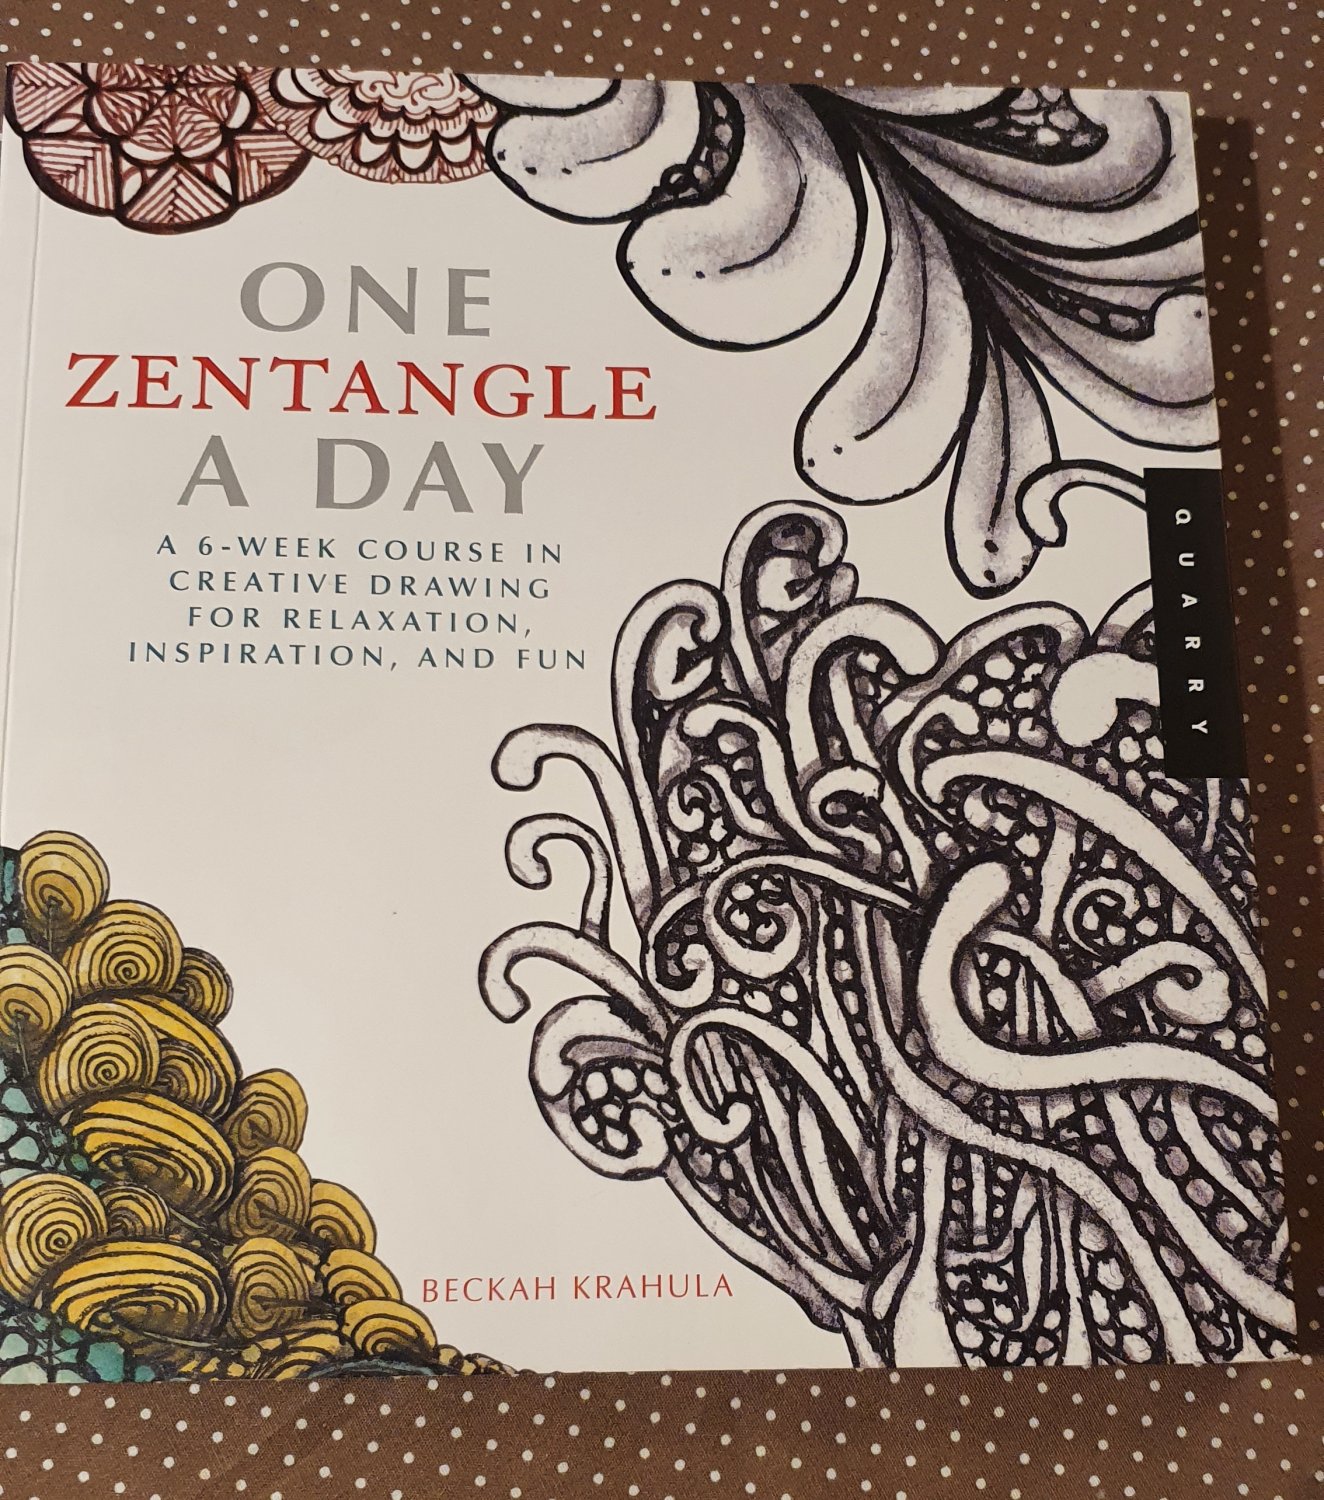 One Zentangle A Day: A 6-Week Course in Creative Drawing for